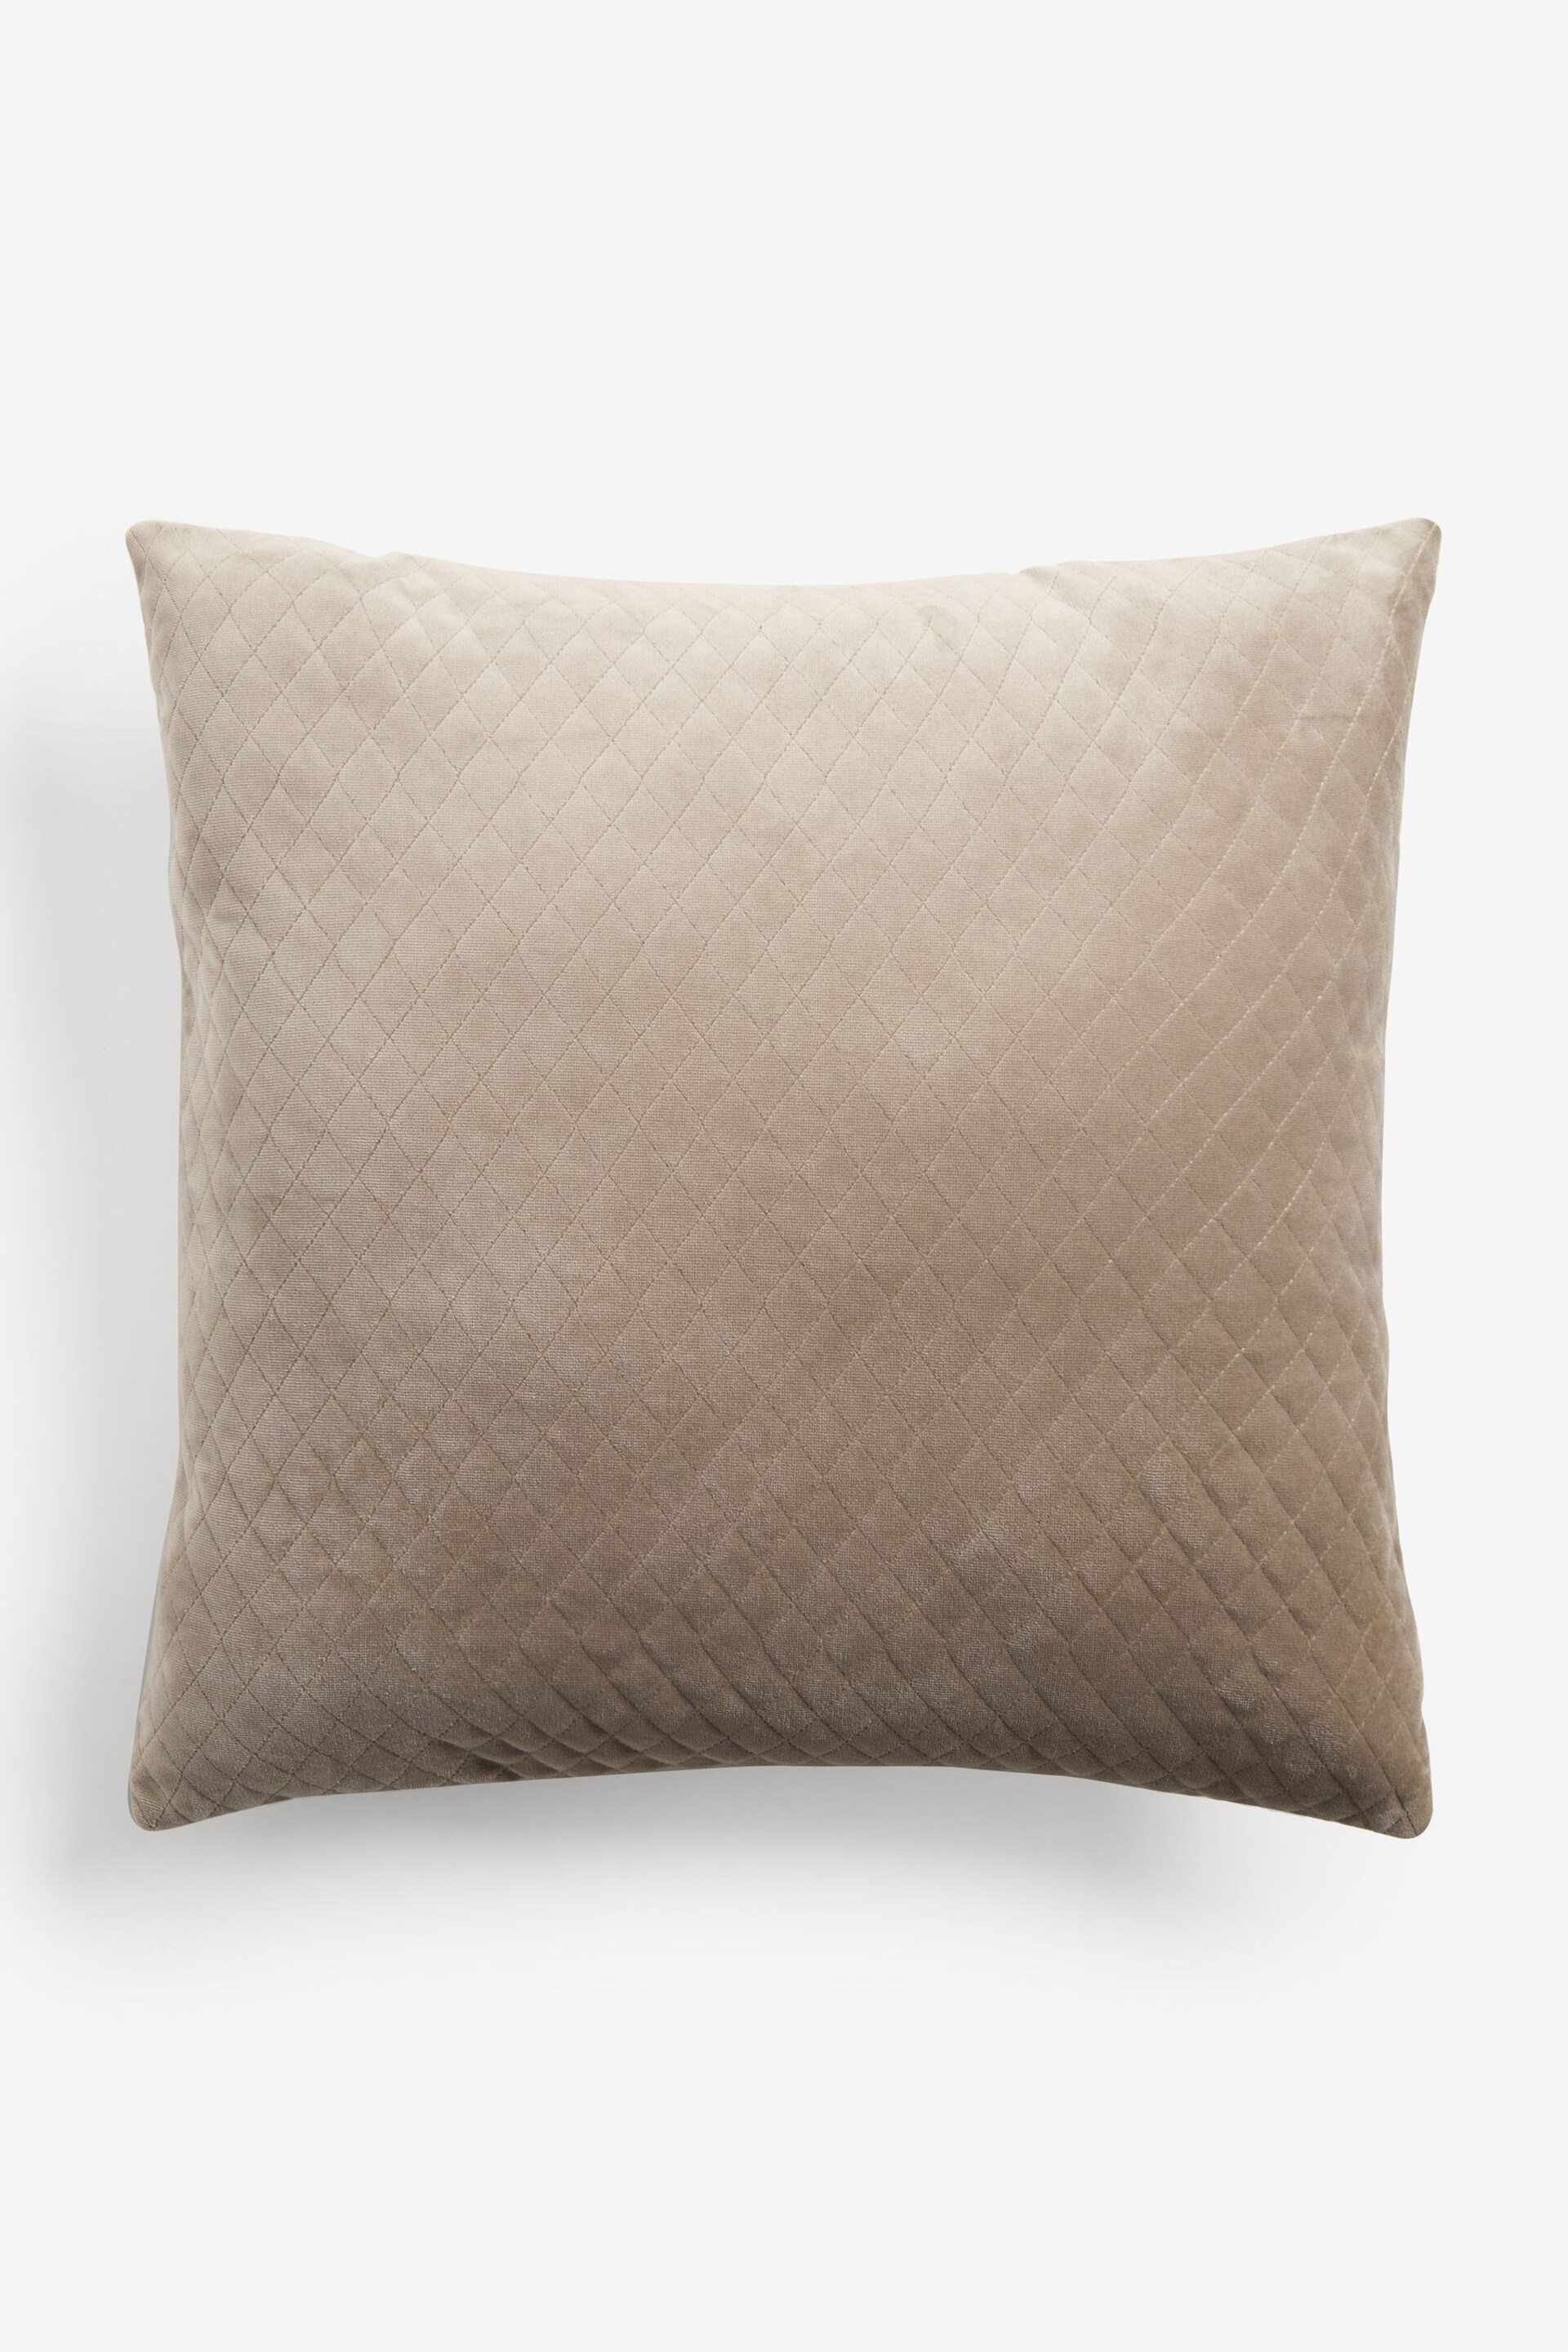 Champagne Gold Velvet Quilted Hamilton 59 x 59cm Cushion - Image 3 of 5